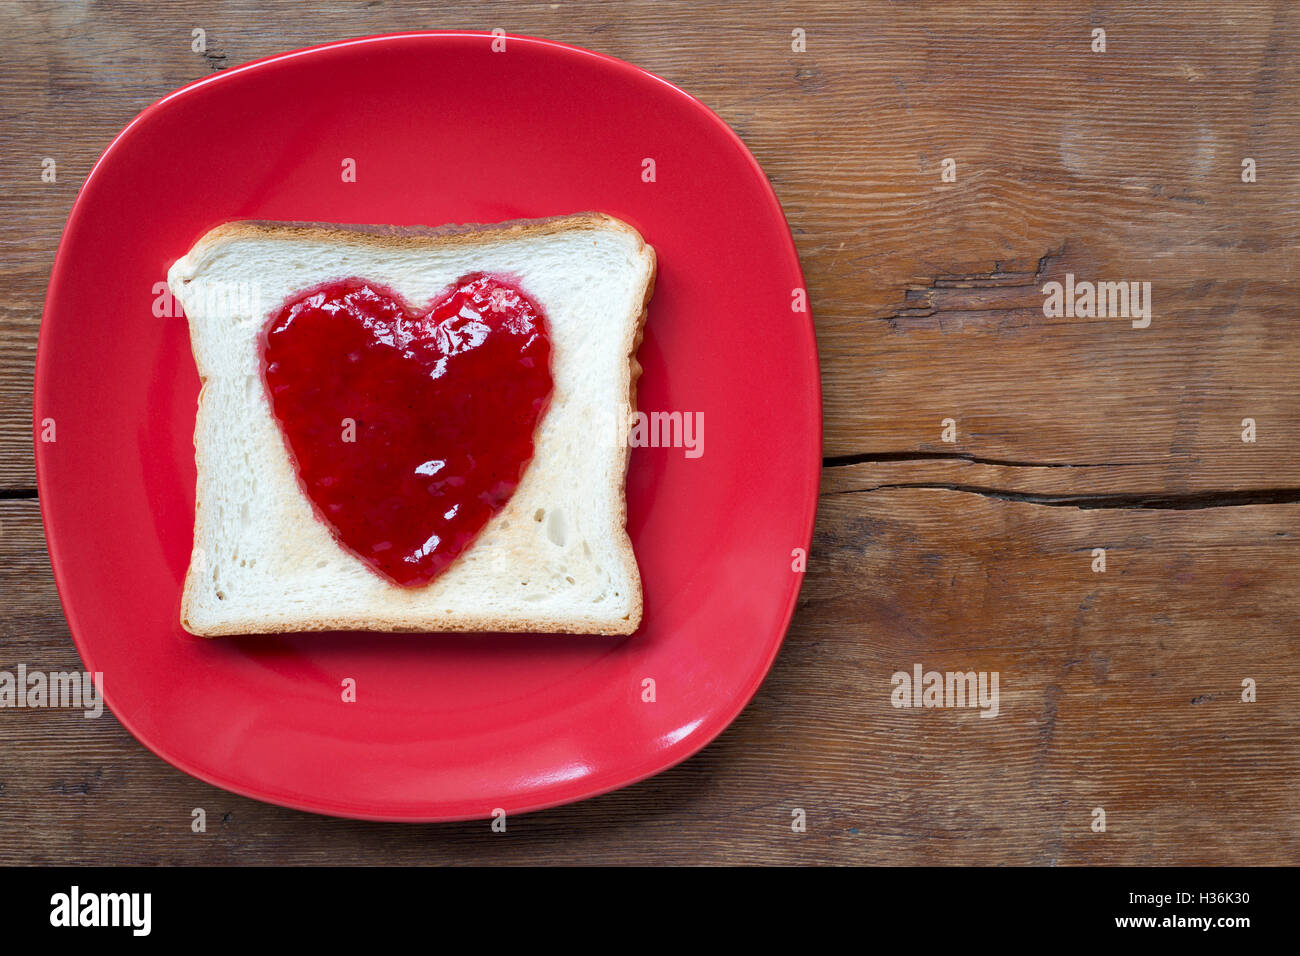 fried toast with heart jam on red plate on vintage wooden surface Stock Photo